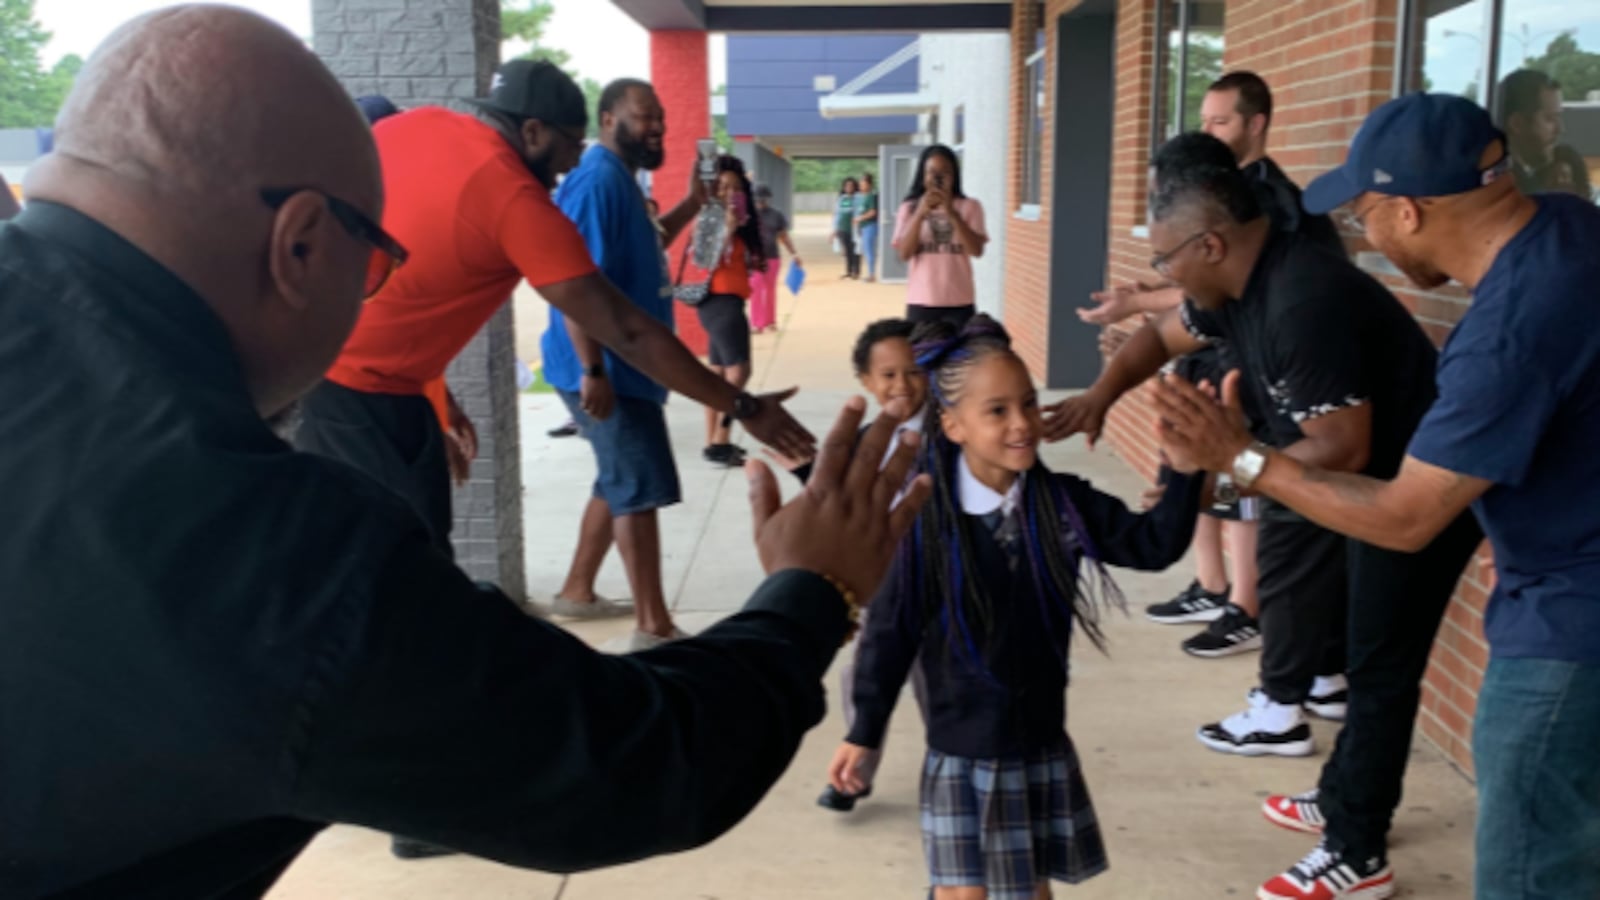 Community members in the Hickory Hill neighborhood offer cheers and high-fives to welcome students back to Power Center Academy Elementary School.